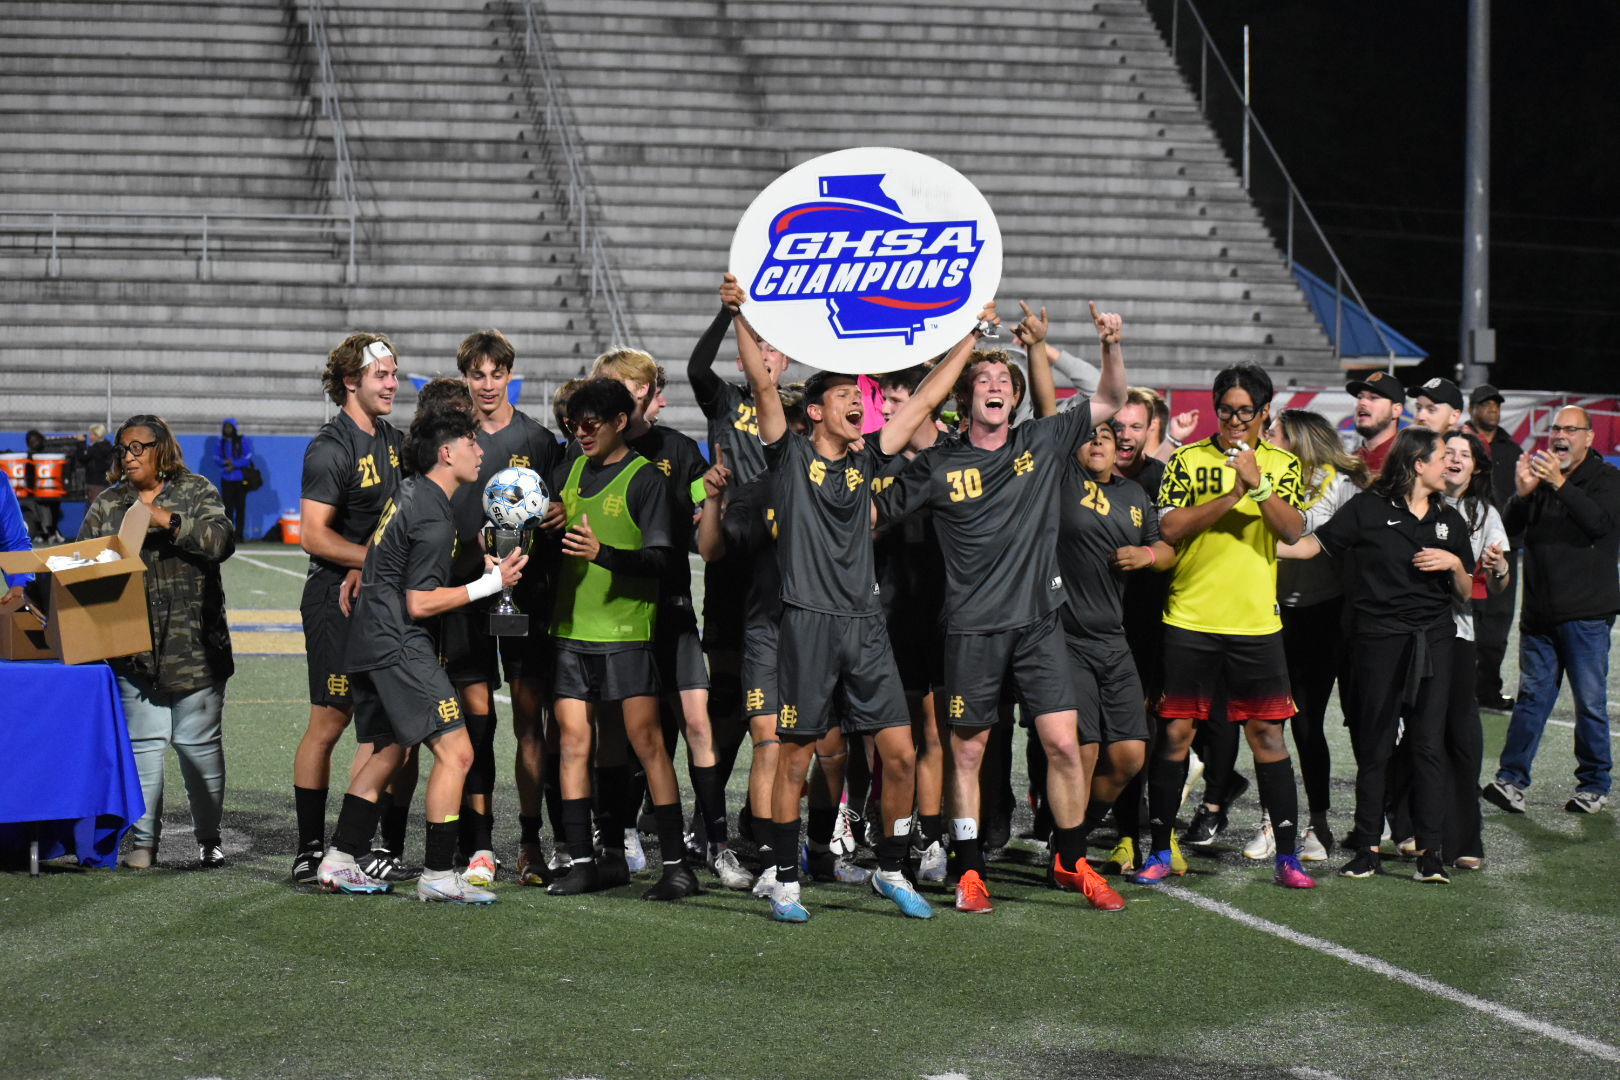 MAYES: Consecutive streak of local soccer state championships comes to an end